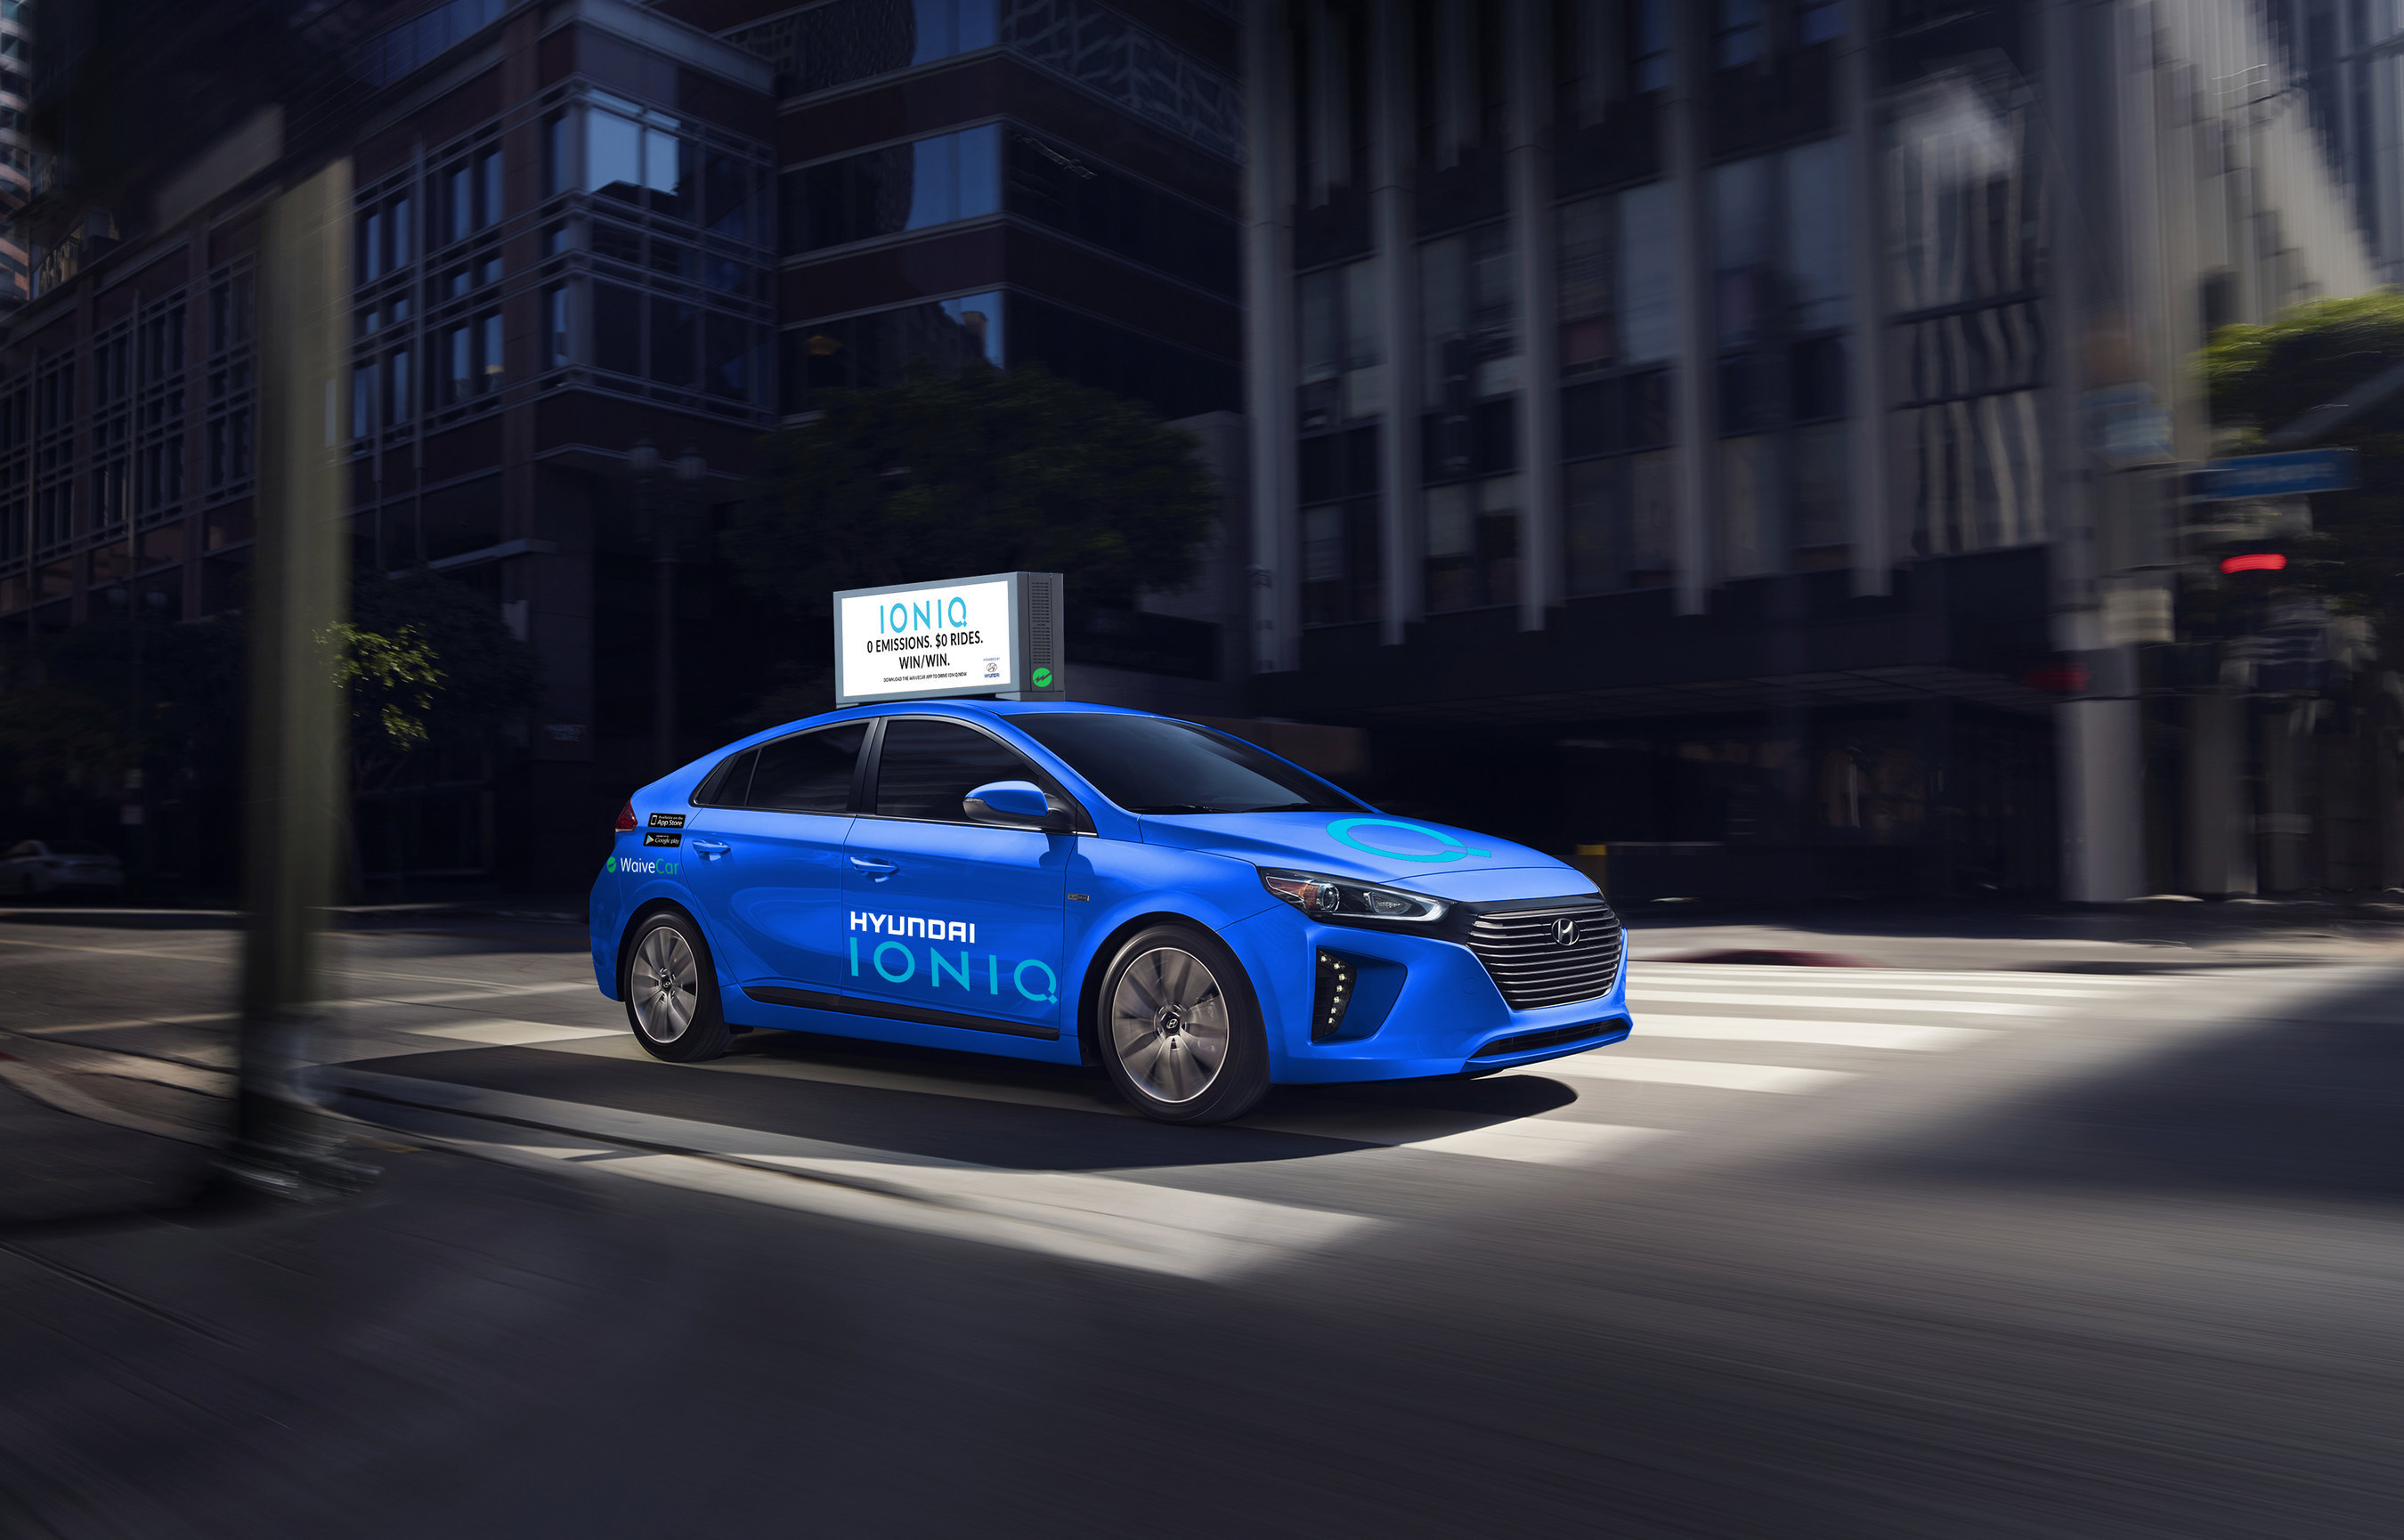 Los Angeles, Nov. 16, 2016 - Hyundai Motor and WaiveCar, the world's first all-electric car-sharing program that runs on advertising dollars, today announced a partnership that will expose millions of shoppers to the all-new Hyundai IONIQ electric compact car for free.